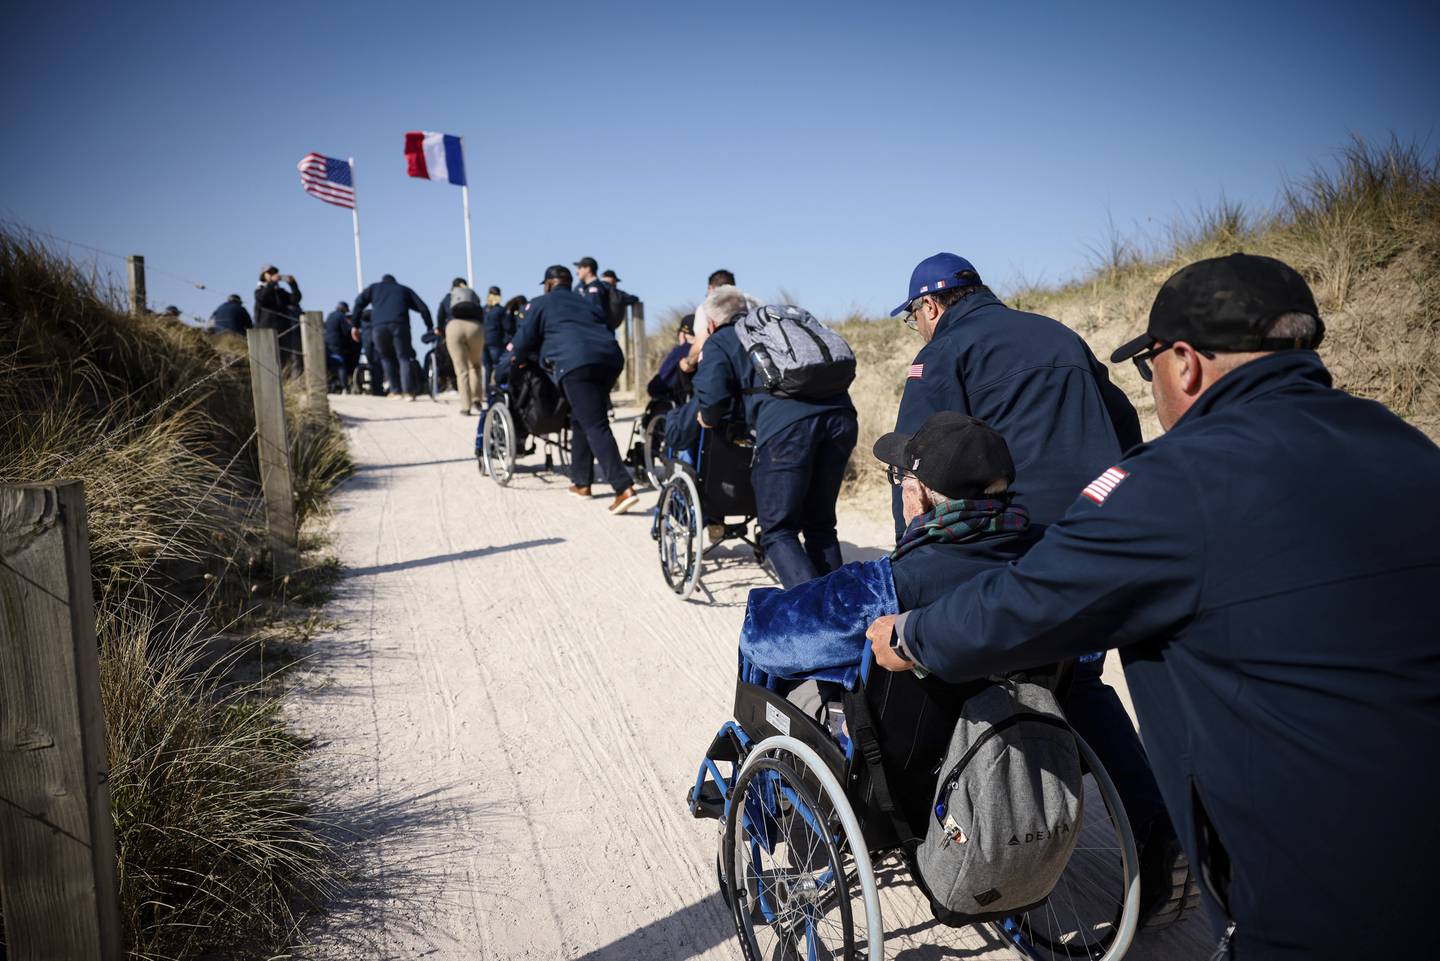 U.S. veterans arrive for the commemoration organized by the Best Defense Foundation at Utah Beach near Sainte-Marie-du-Mont, Normandy, France, Sunday, June 4, 2023, ahead of the D-Day Anniversary.